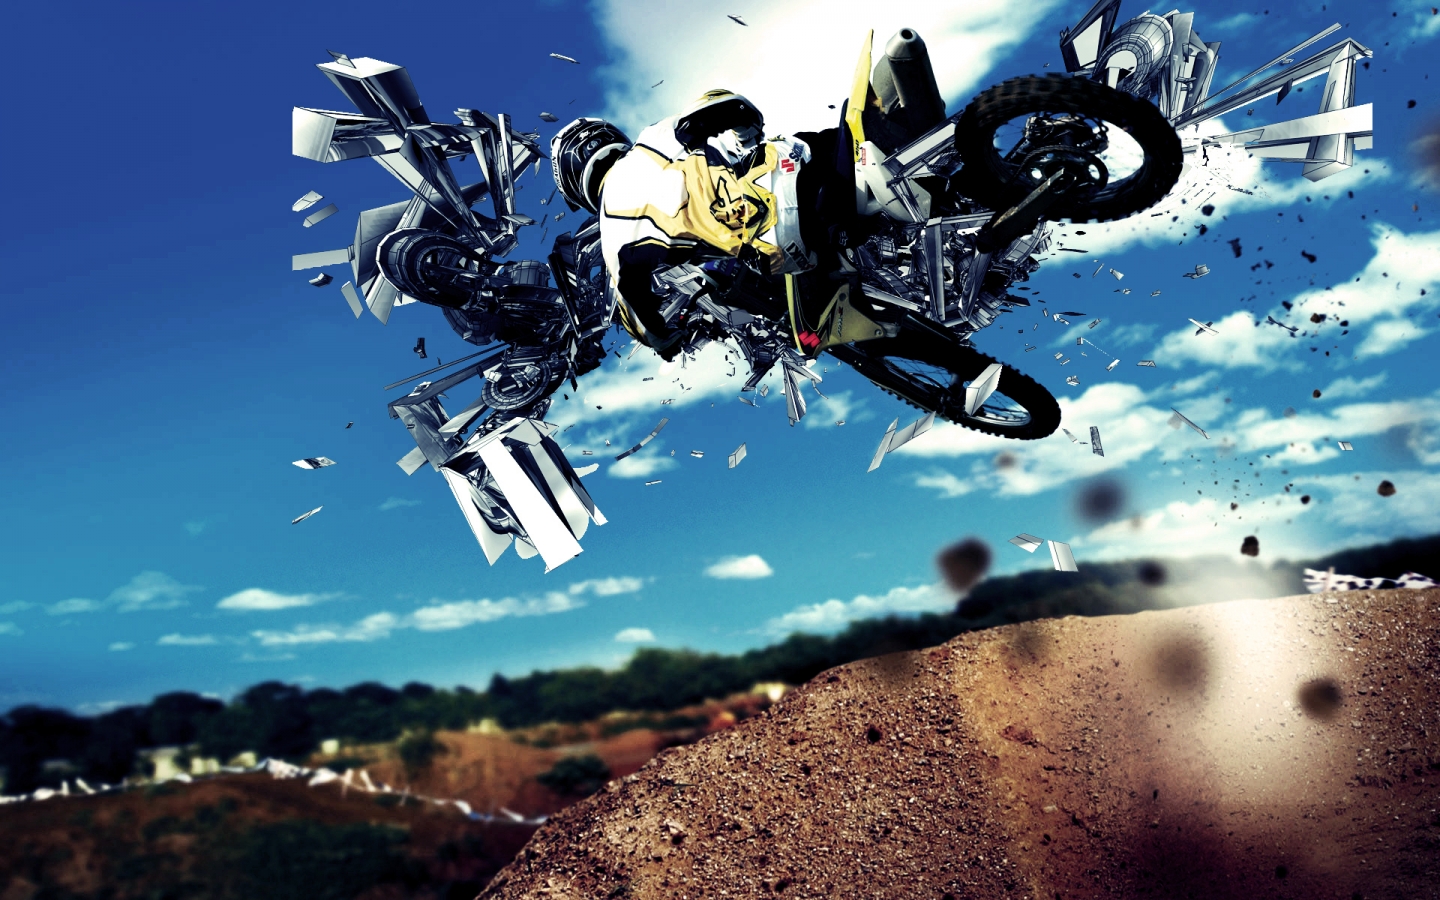 Motorcycle Race for 1440 x 900 widescreen resolution